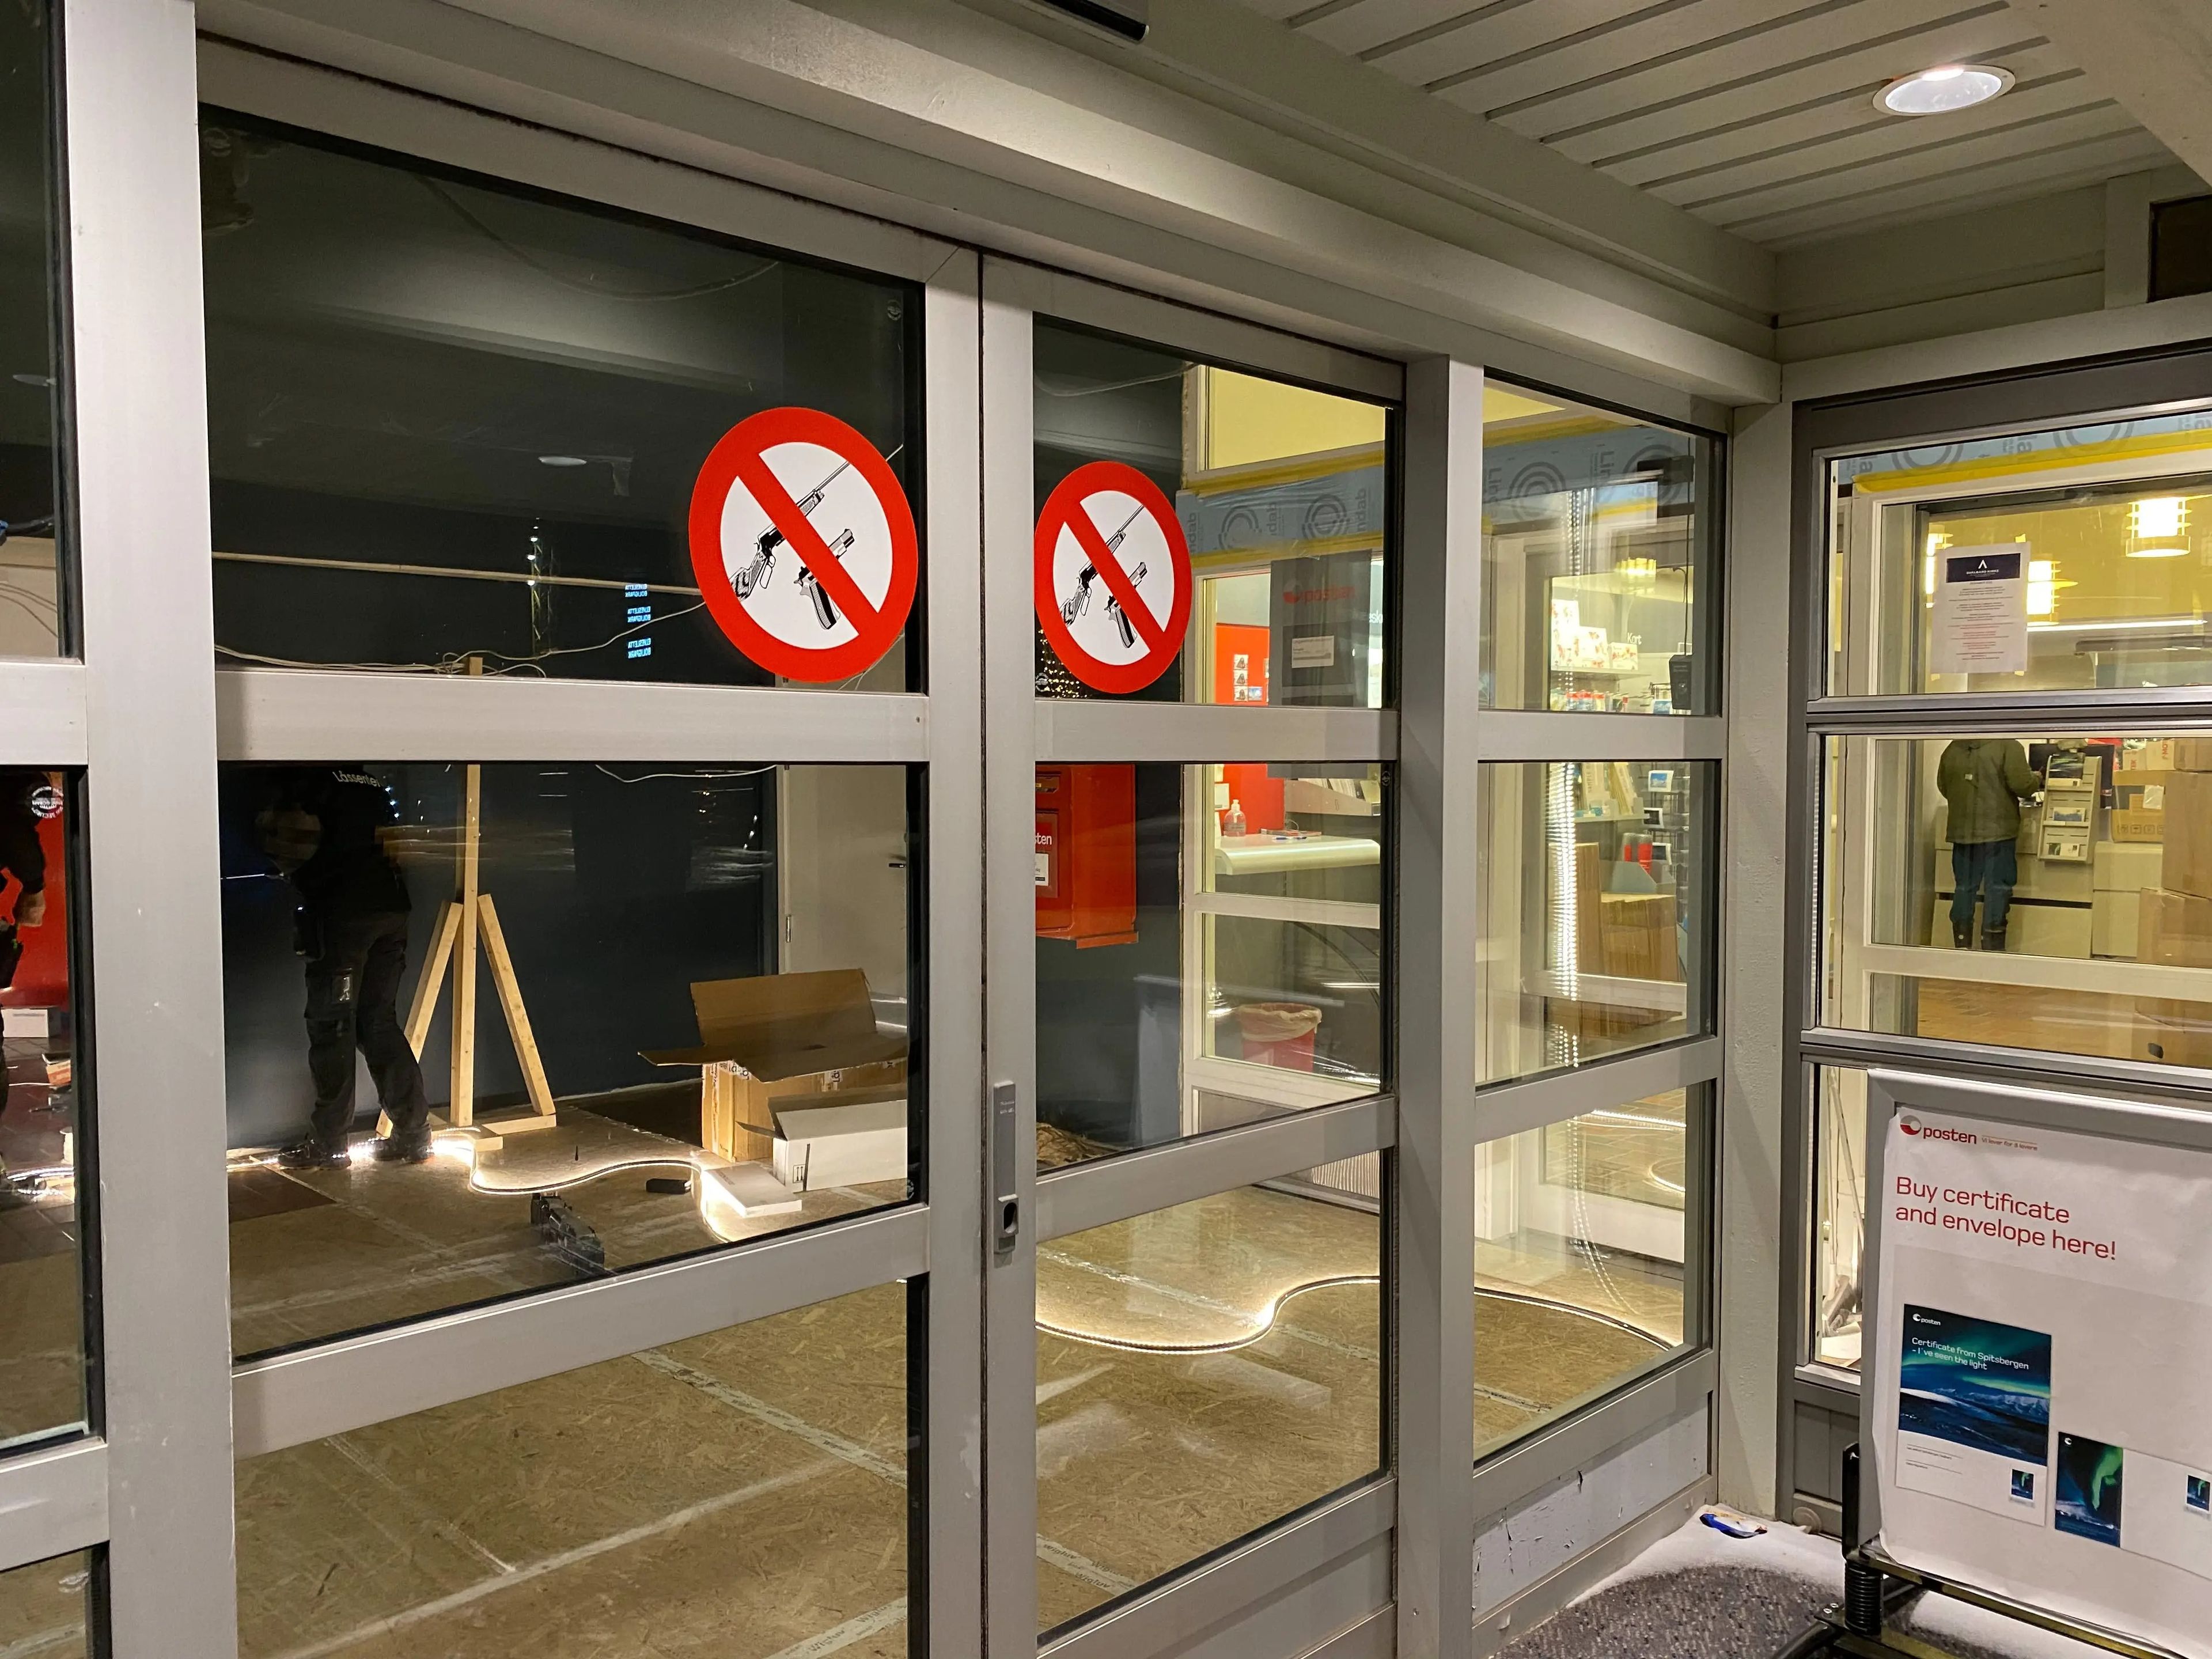 Automatic sliding doors with "no firearms" signs on them